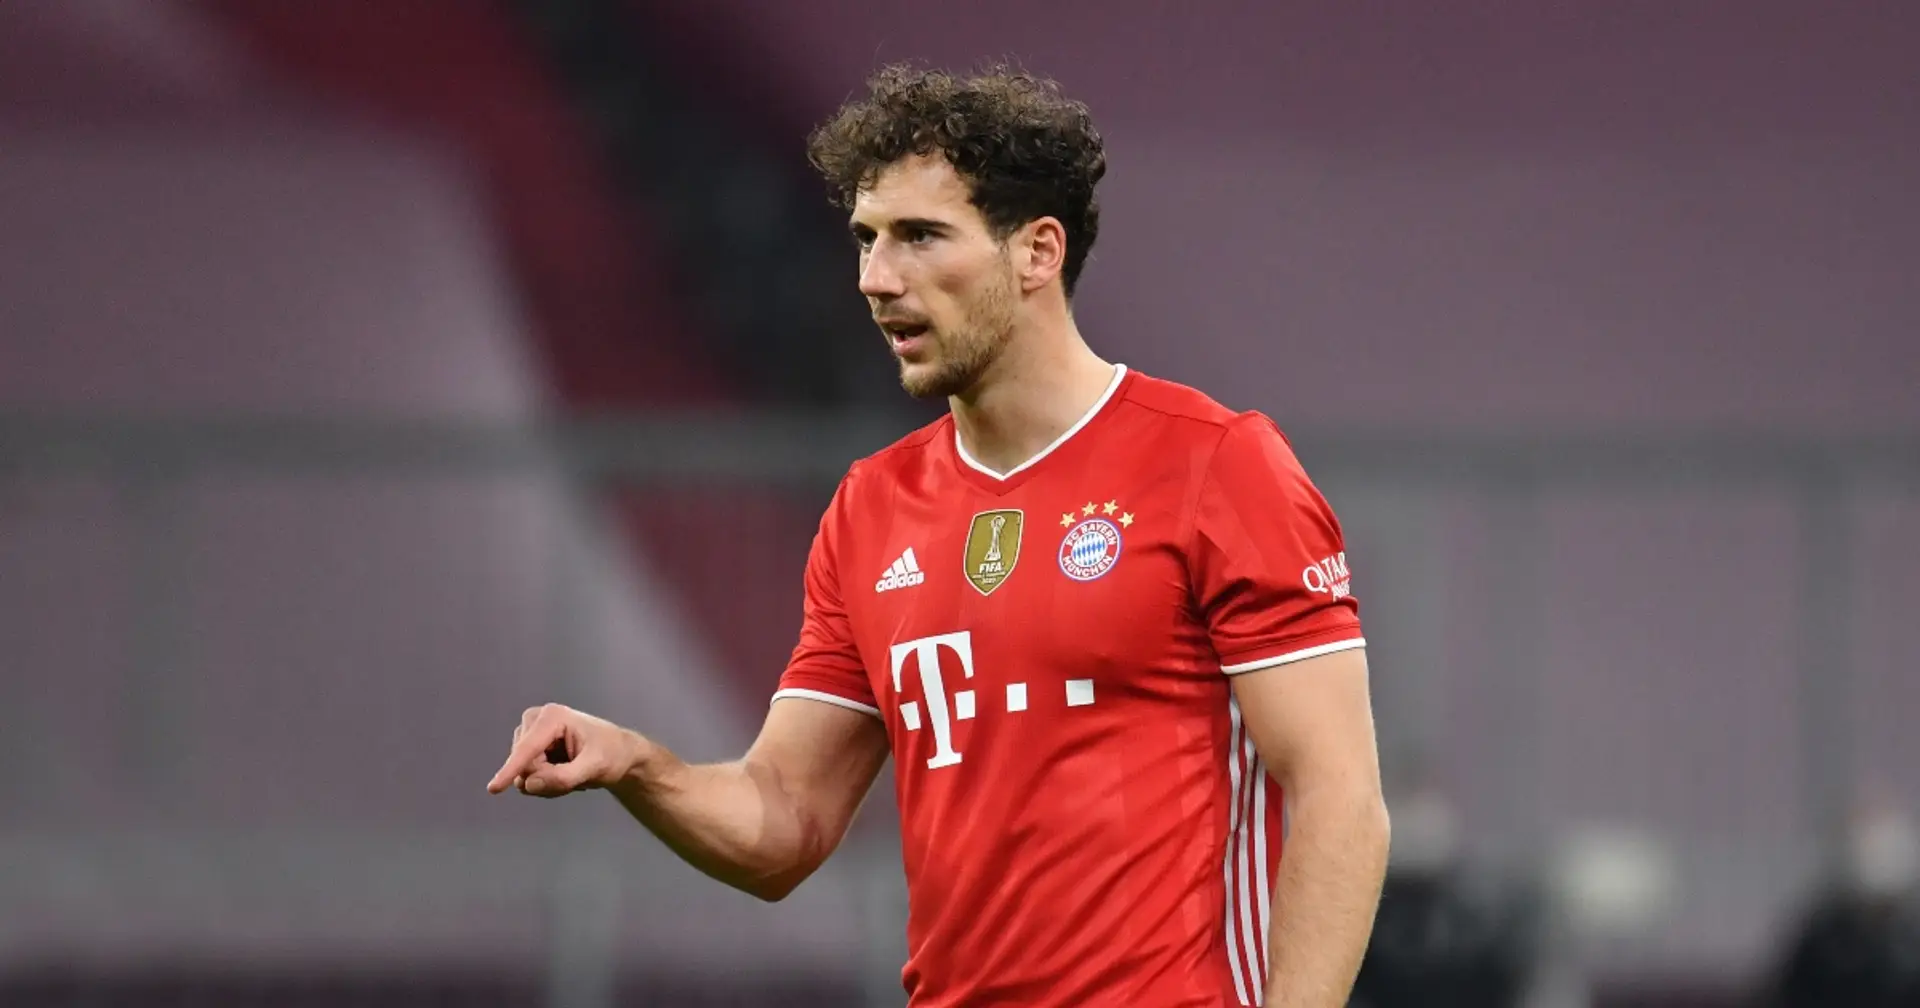 Sport Bild: Man United 'submit contract offer' to Goretzka, player could join next summer (reliability: 4 stars)